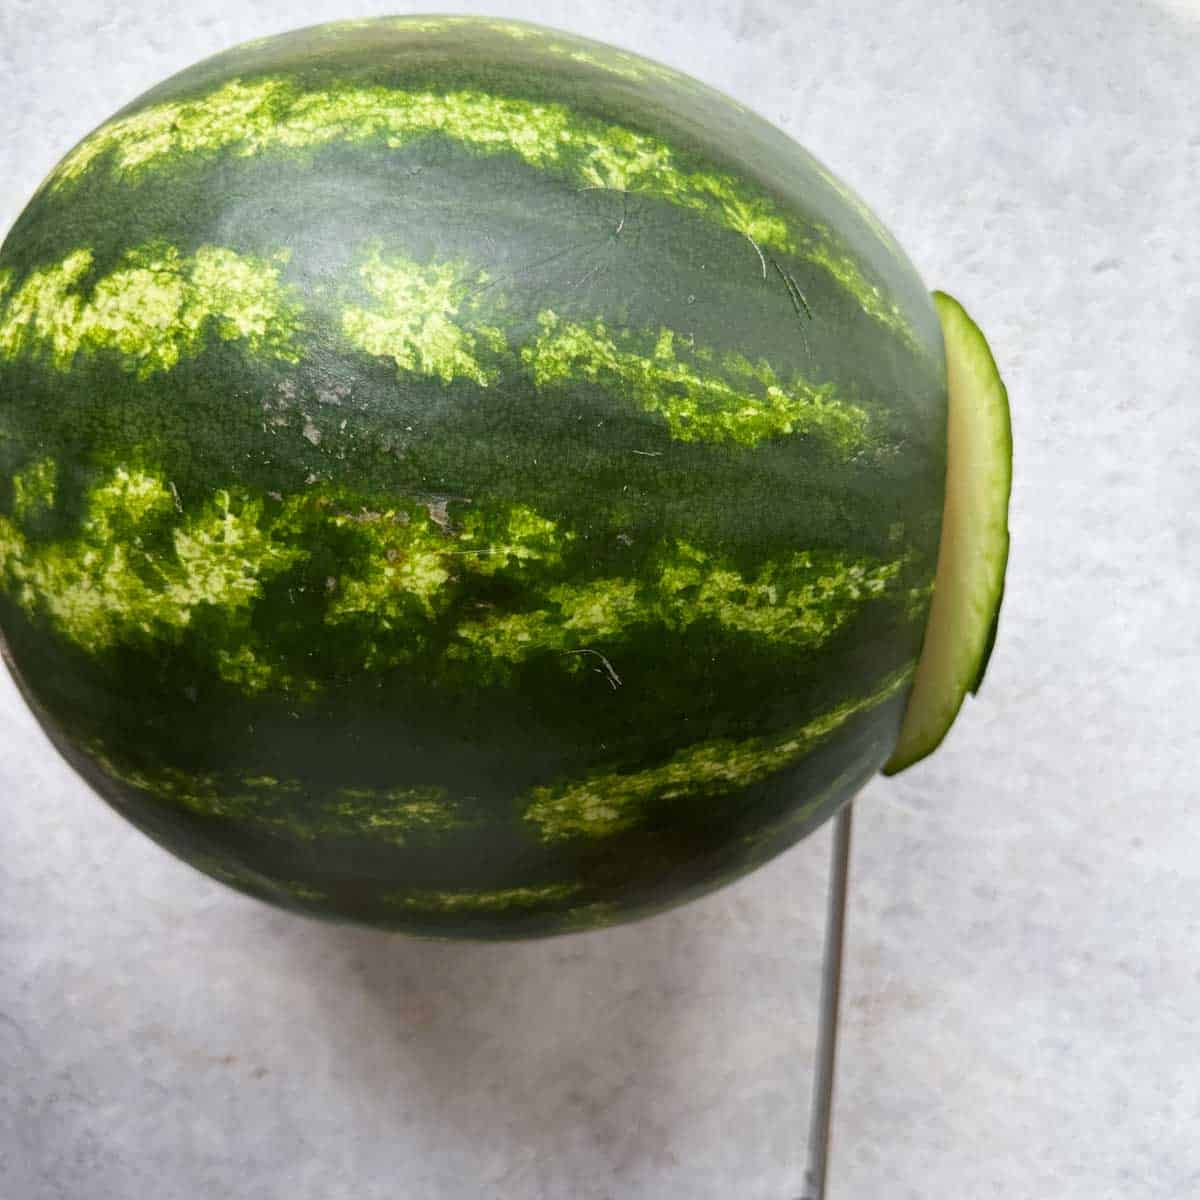 Cutting the bottom of the watermelon with a knife to make it flat